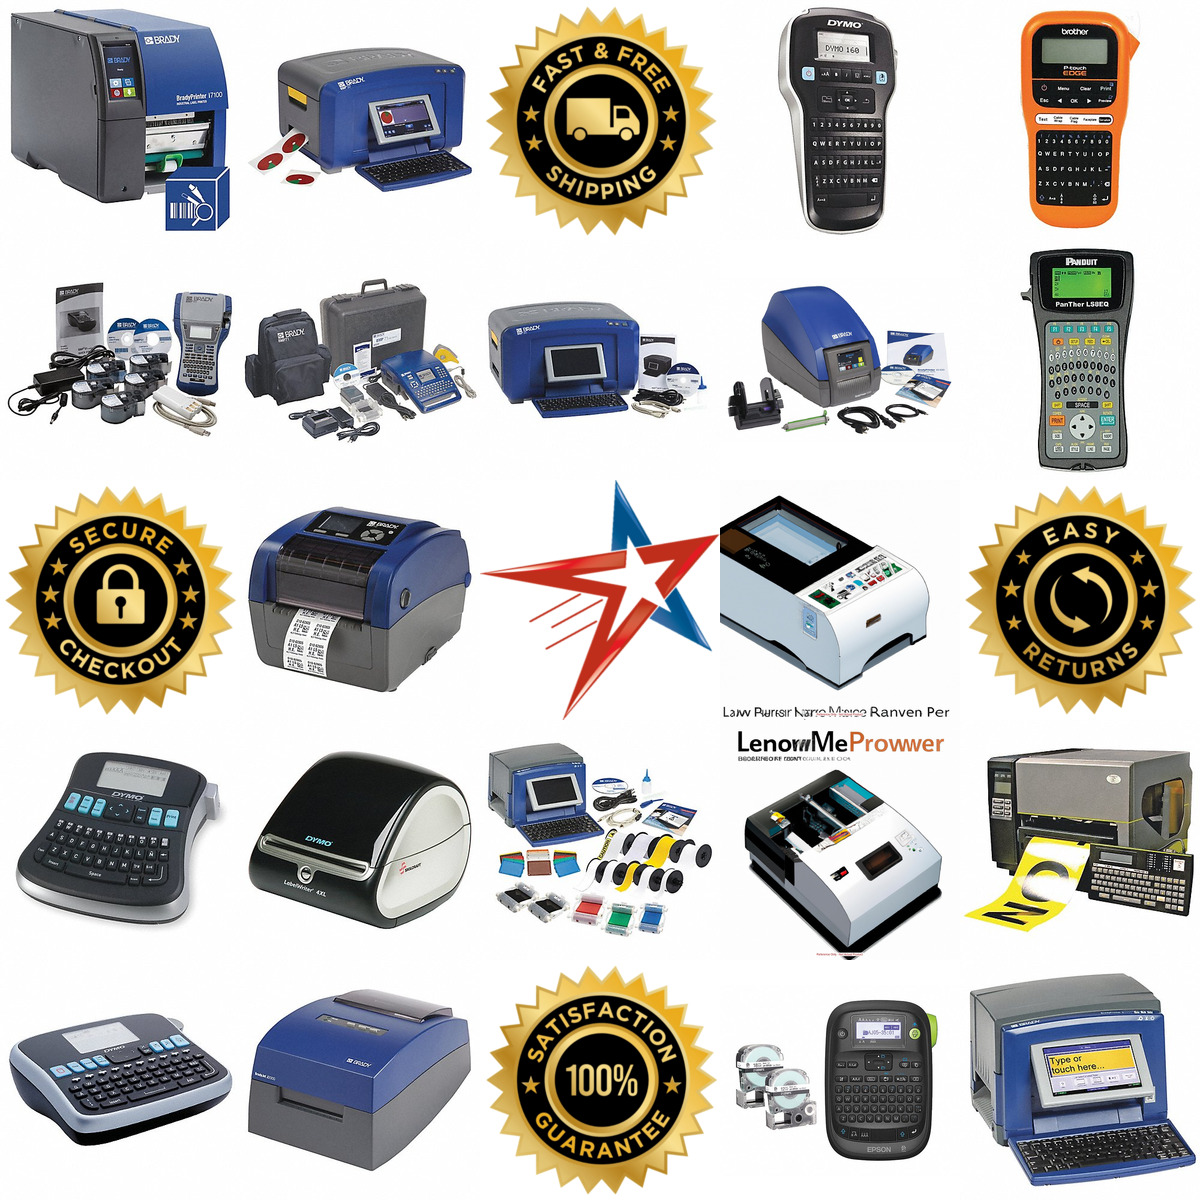 A selection of Label Maker Printers products on GoVets